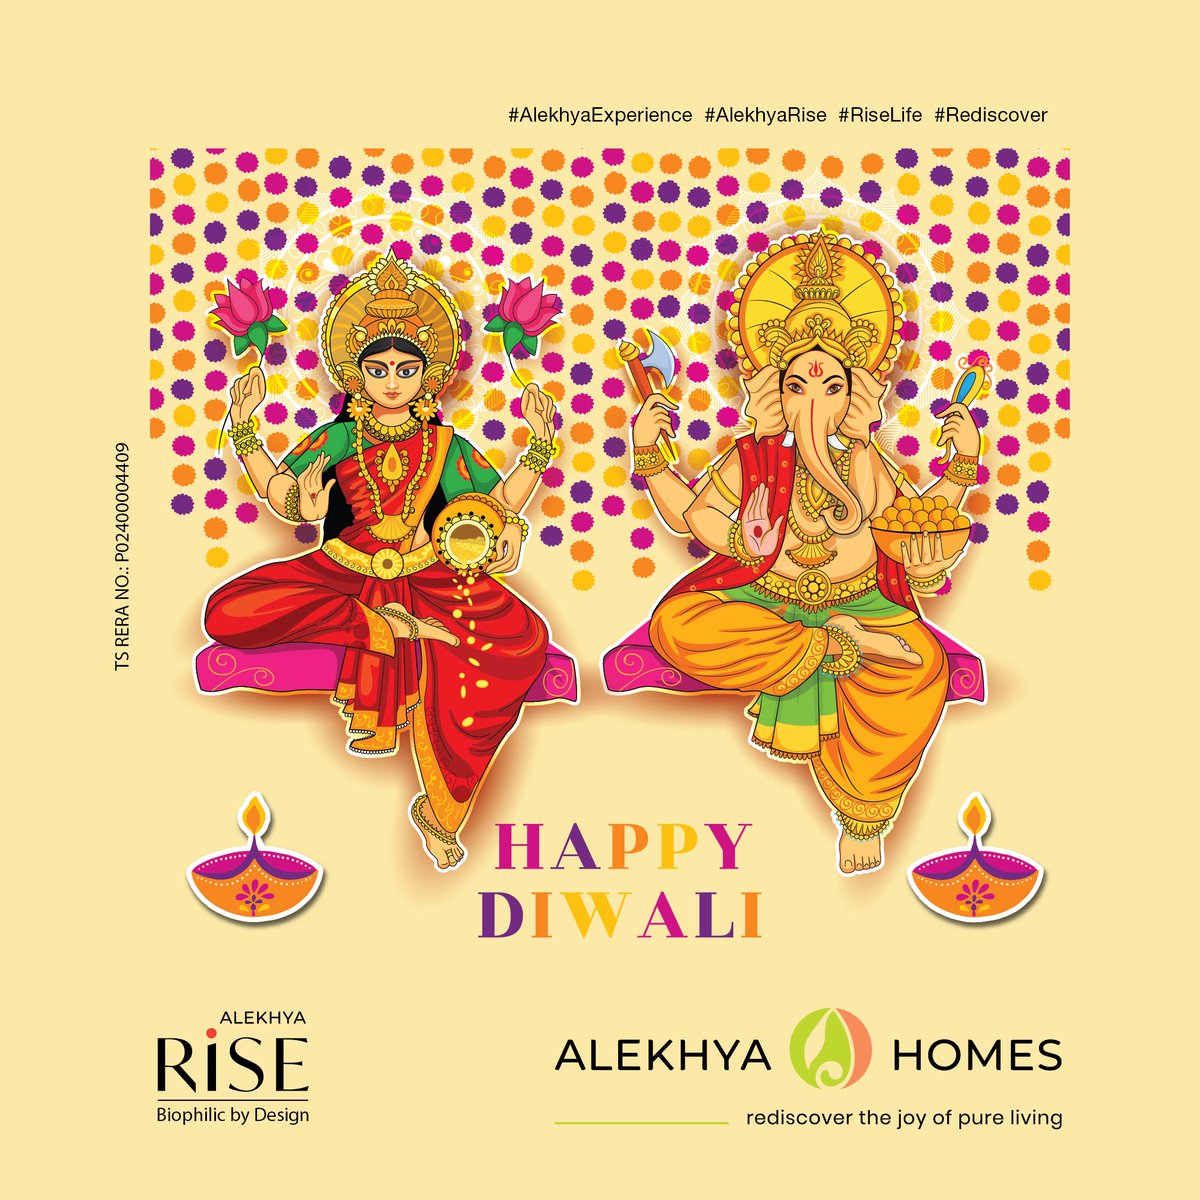 Love, light, prosperity and joy... Happy Diwali to all!
#AlekhyaHomes #AlekhyaRise #biophilicbydesign #biophilichomes #expressionofculture #sustainablefuture #CollectiveCommunity